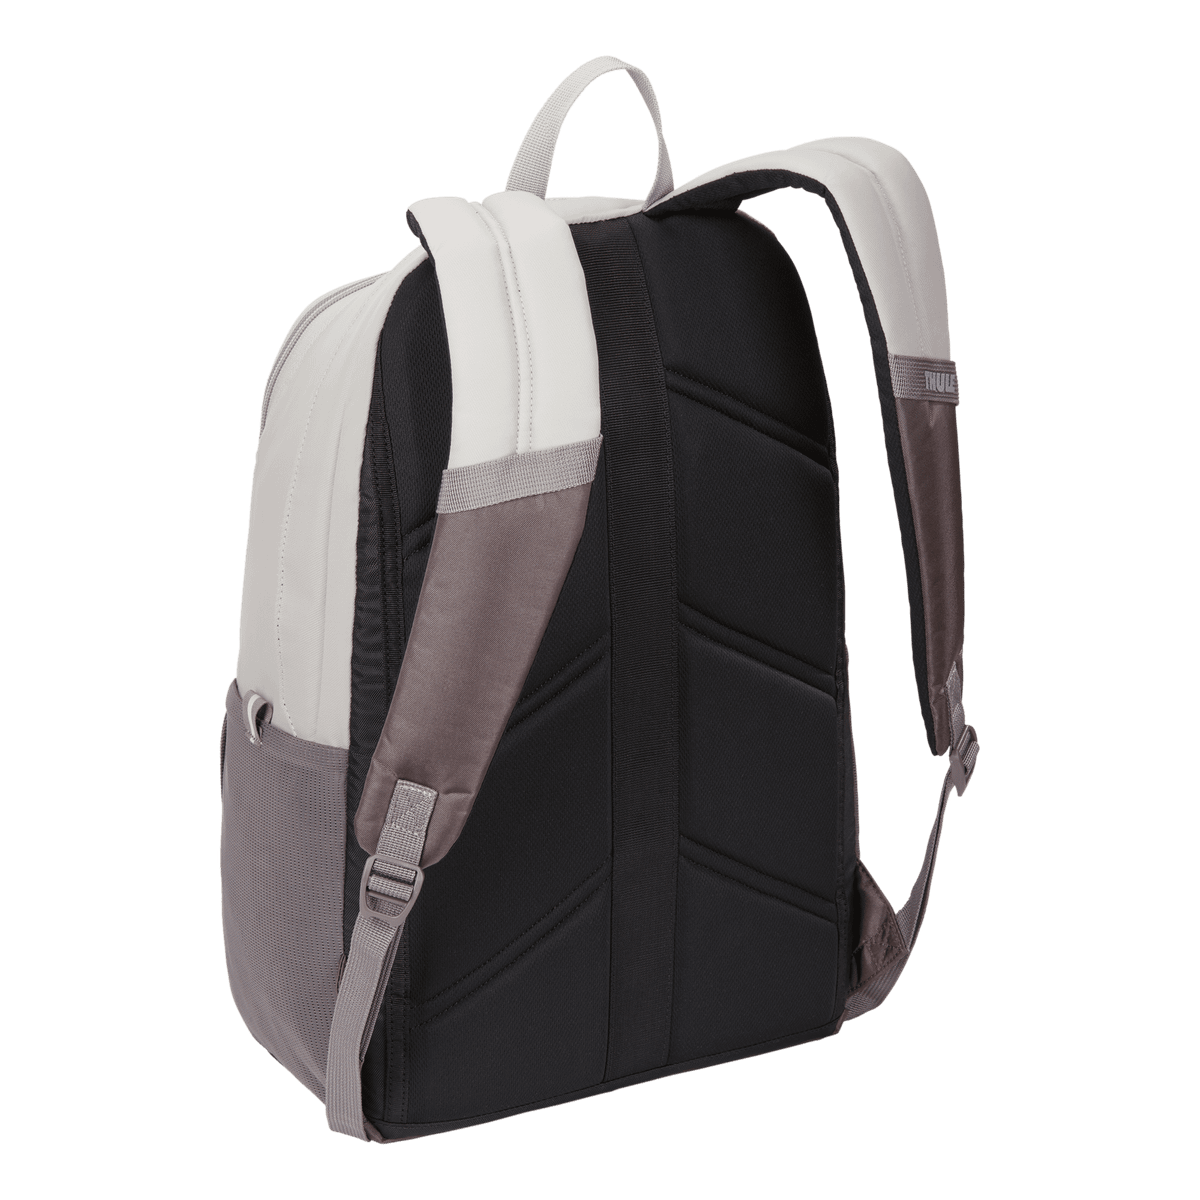 Thule Departer backpack 21L paloma gray/suede gray